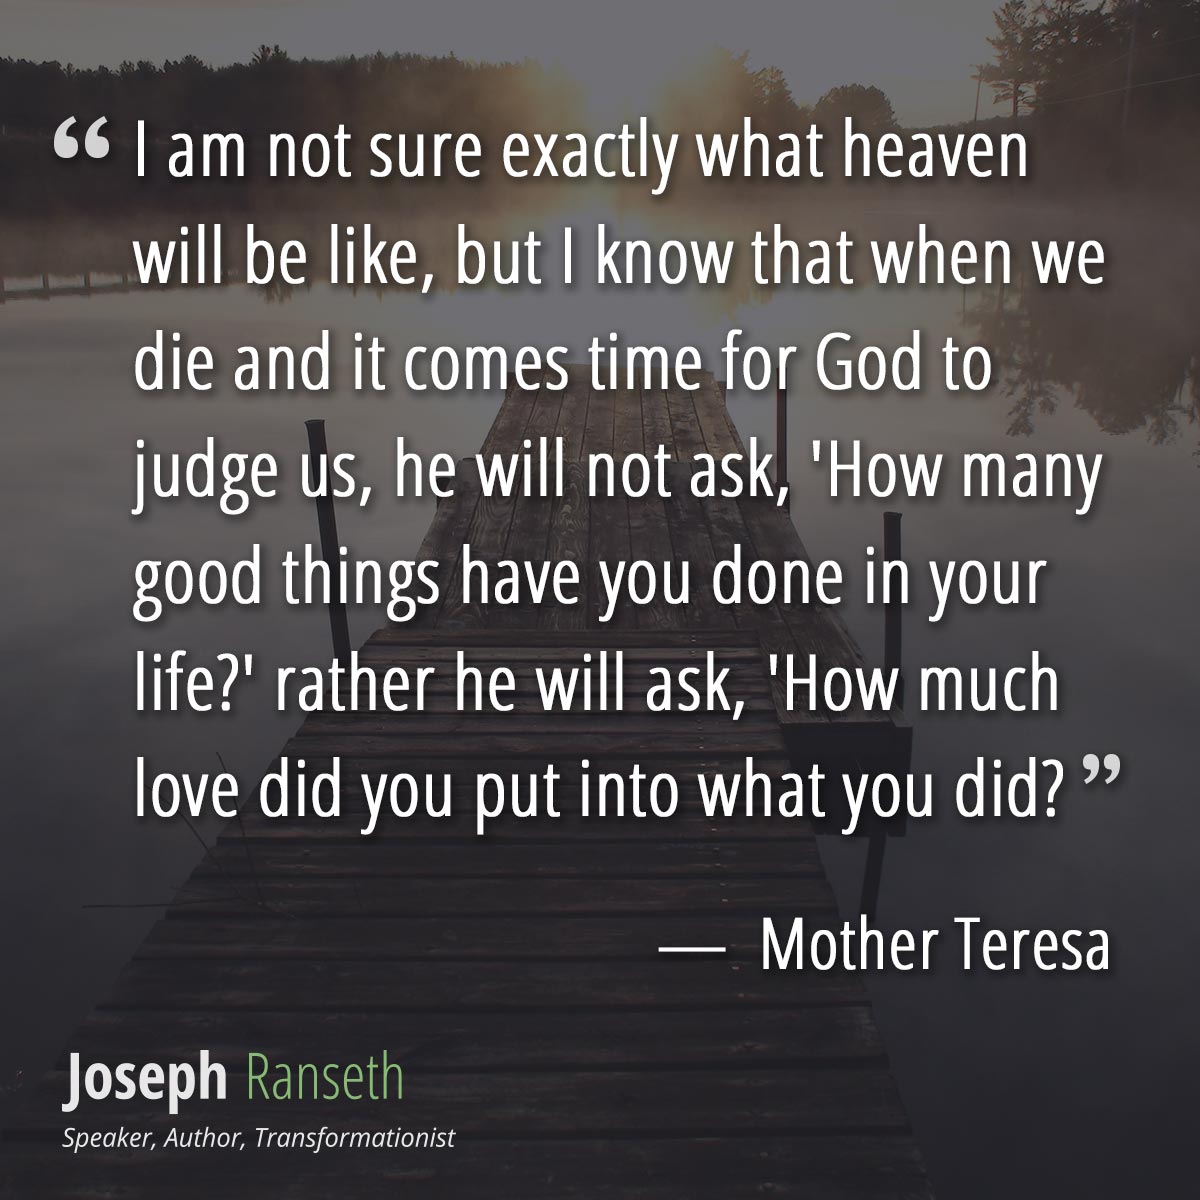 I am not sure exactly what heaven will be like, but I know that when we die and it comes time for God to judge us, he will not ask, 'How many good things have you done in your life?' rather he will ask, 'How much love did you put into what you did?